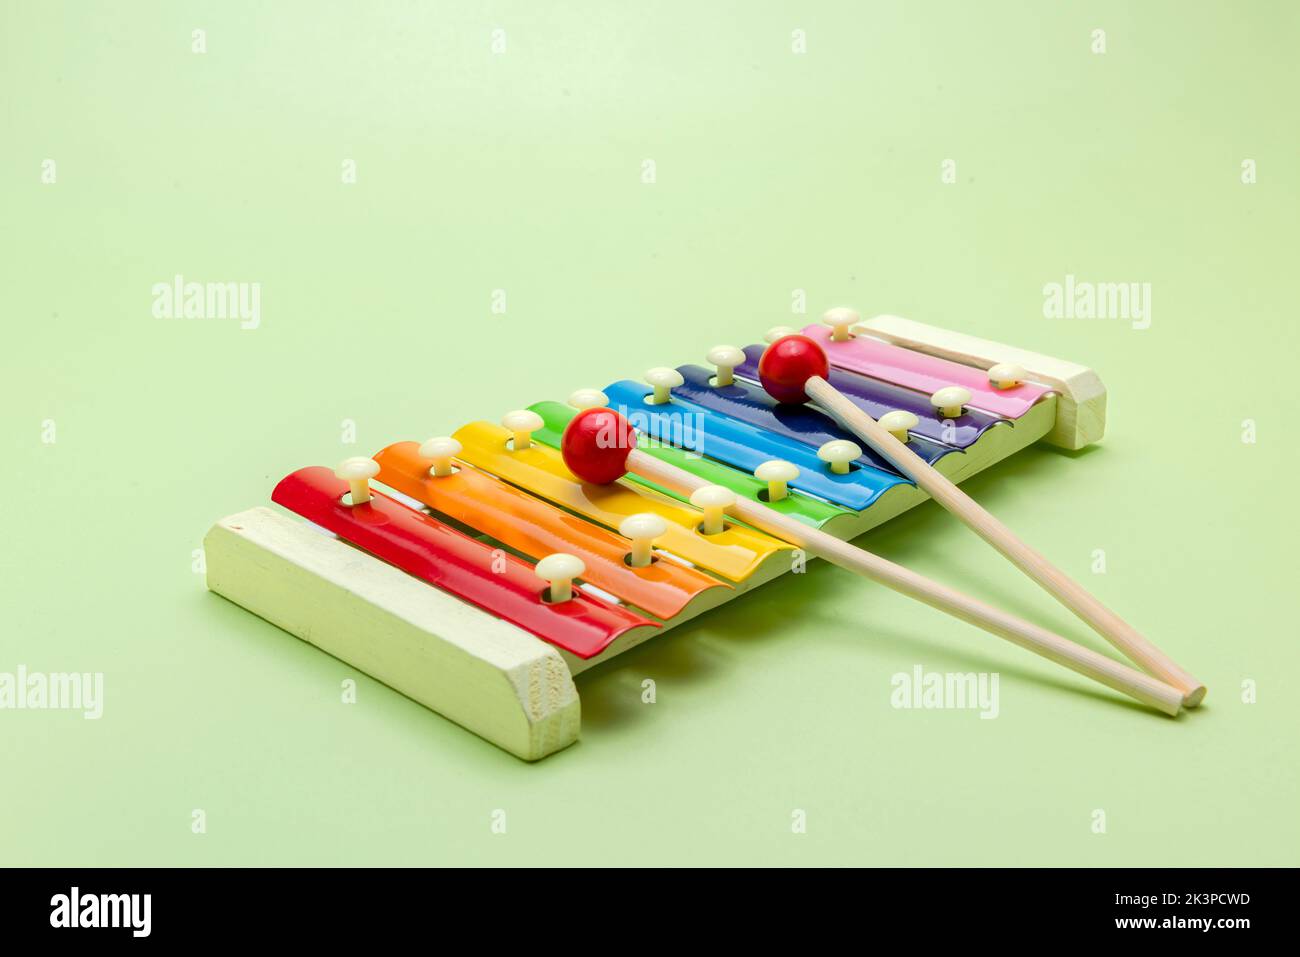 Colorful wooden xylophone toy on a colored background Stock Photo